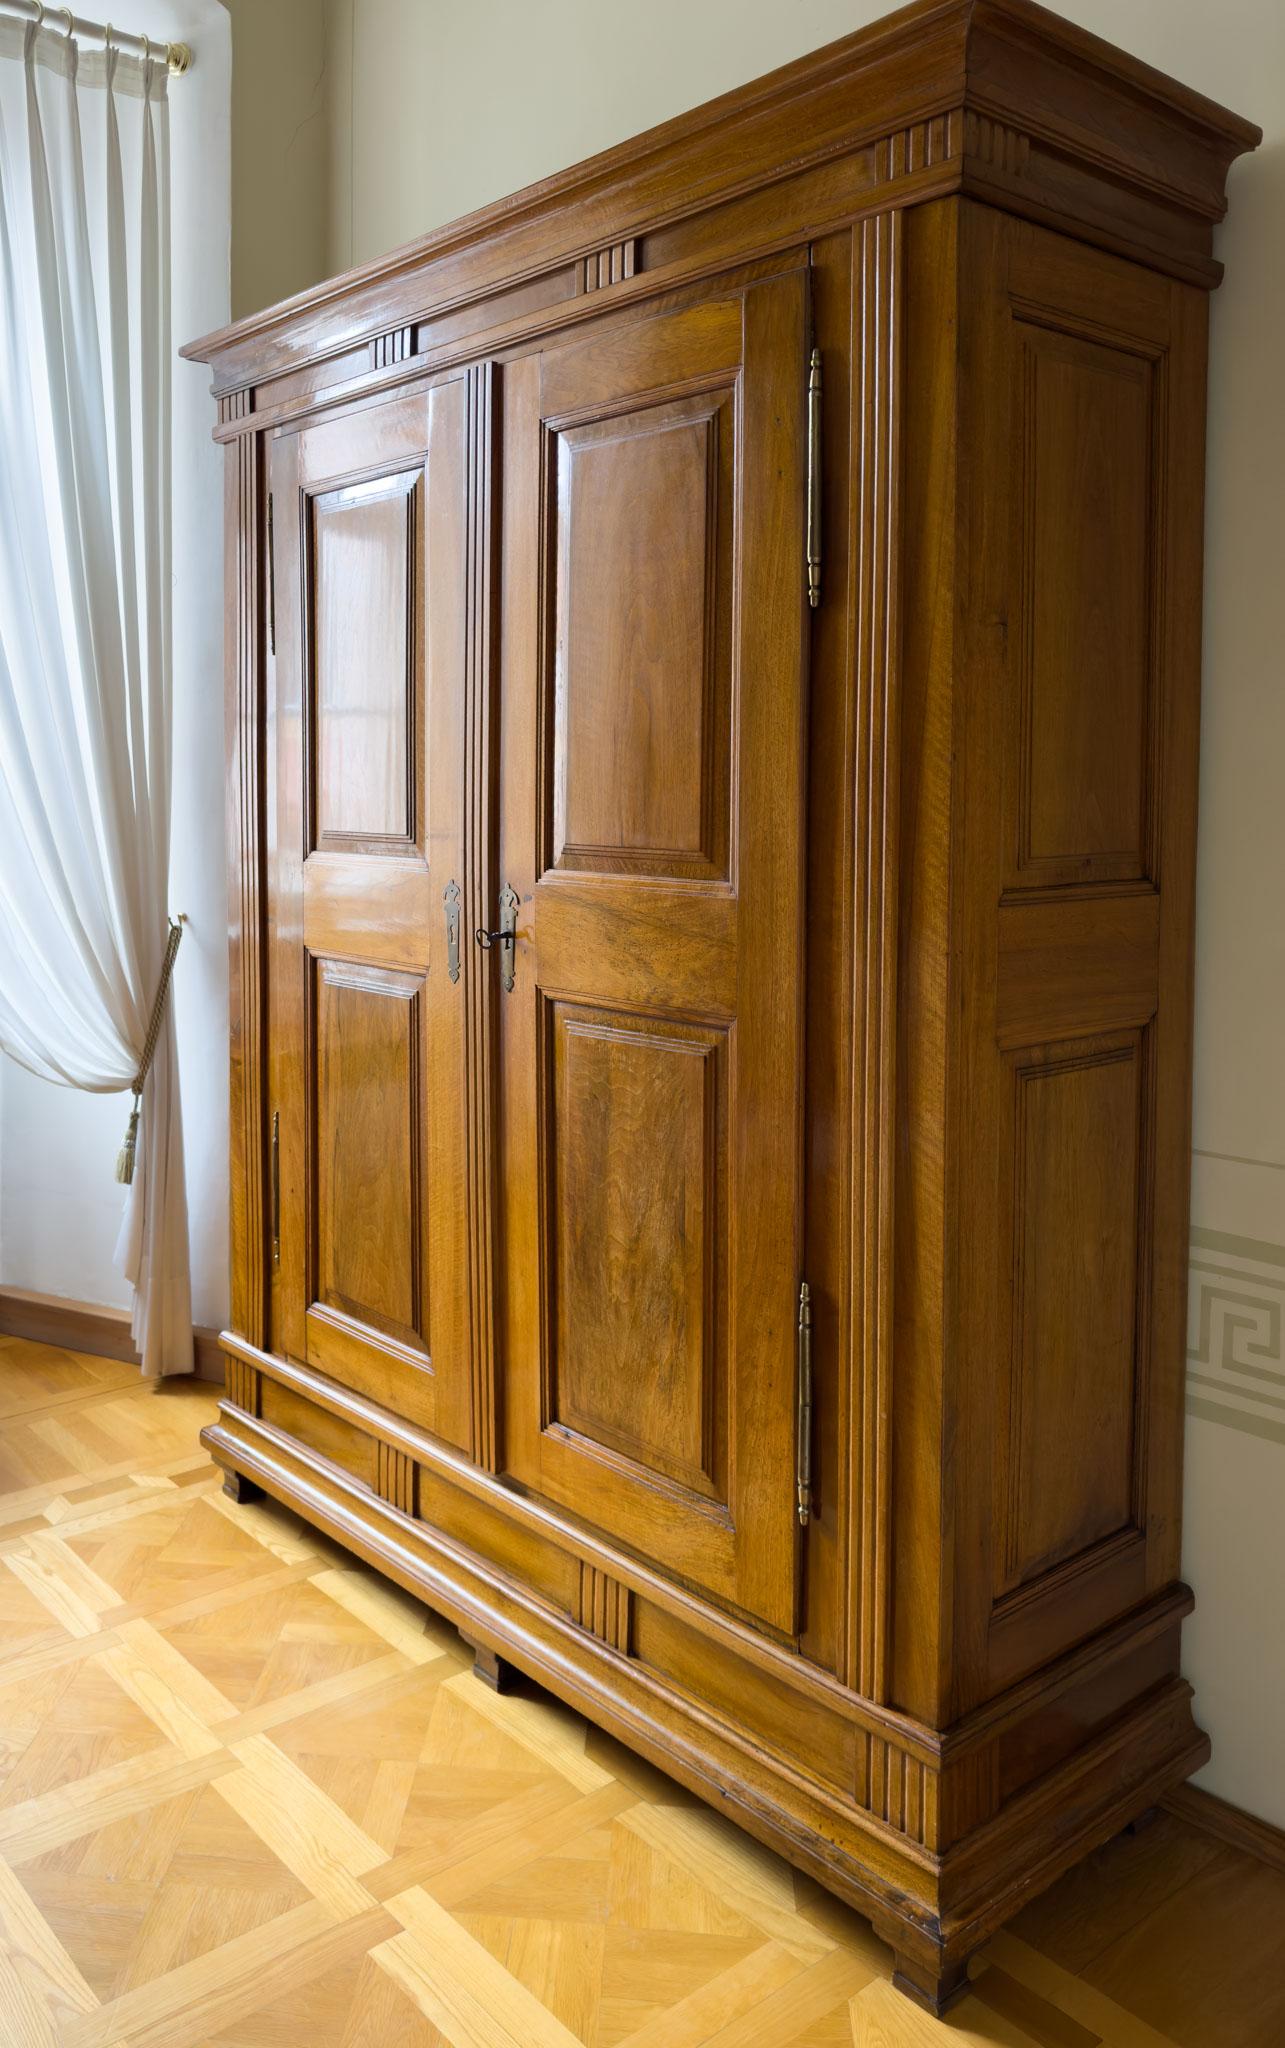 Two-door wardrobe in walnut with coffered doors and sides and fluted pilaster elements as well as a profiled cornice. The wardrobe stands on low socketed pointed feet with a high plinth zone. Iron bar lock with rotating shackle.